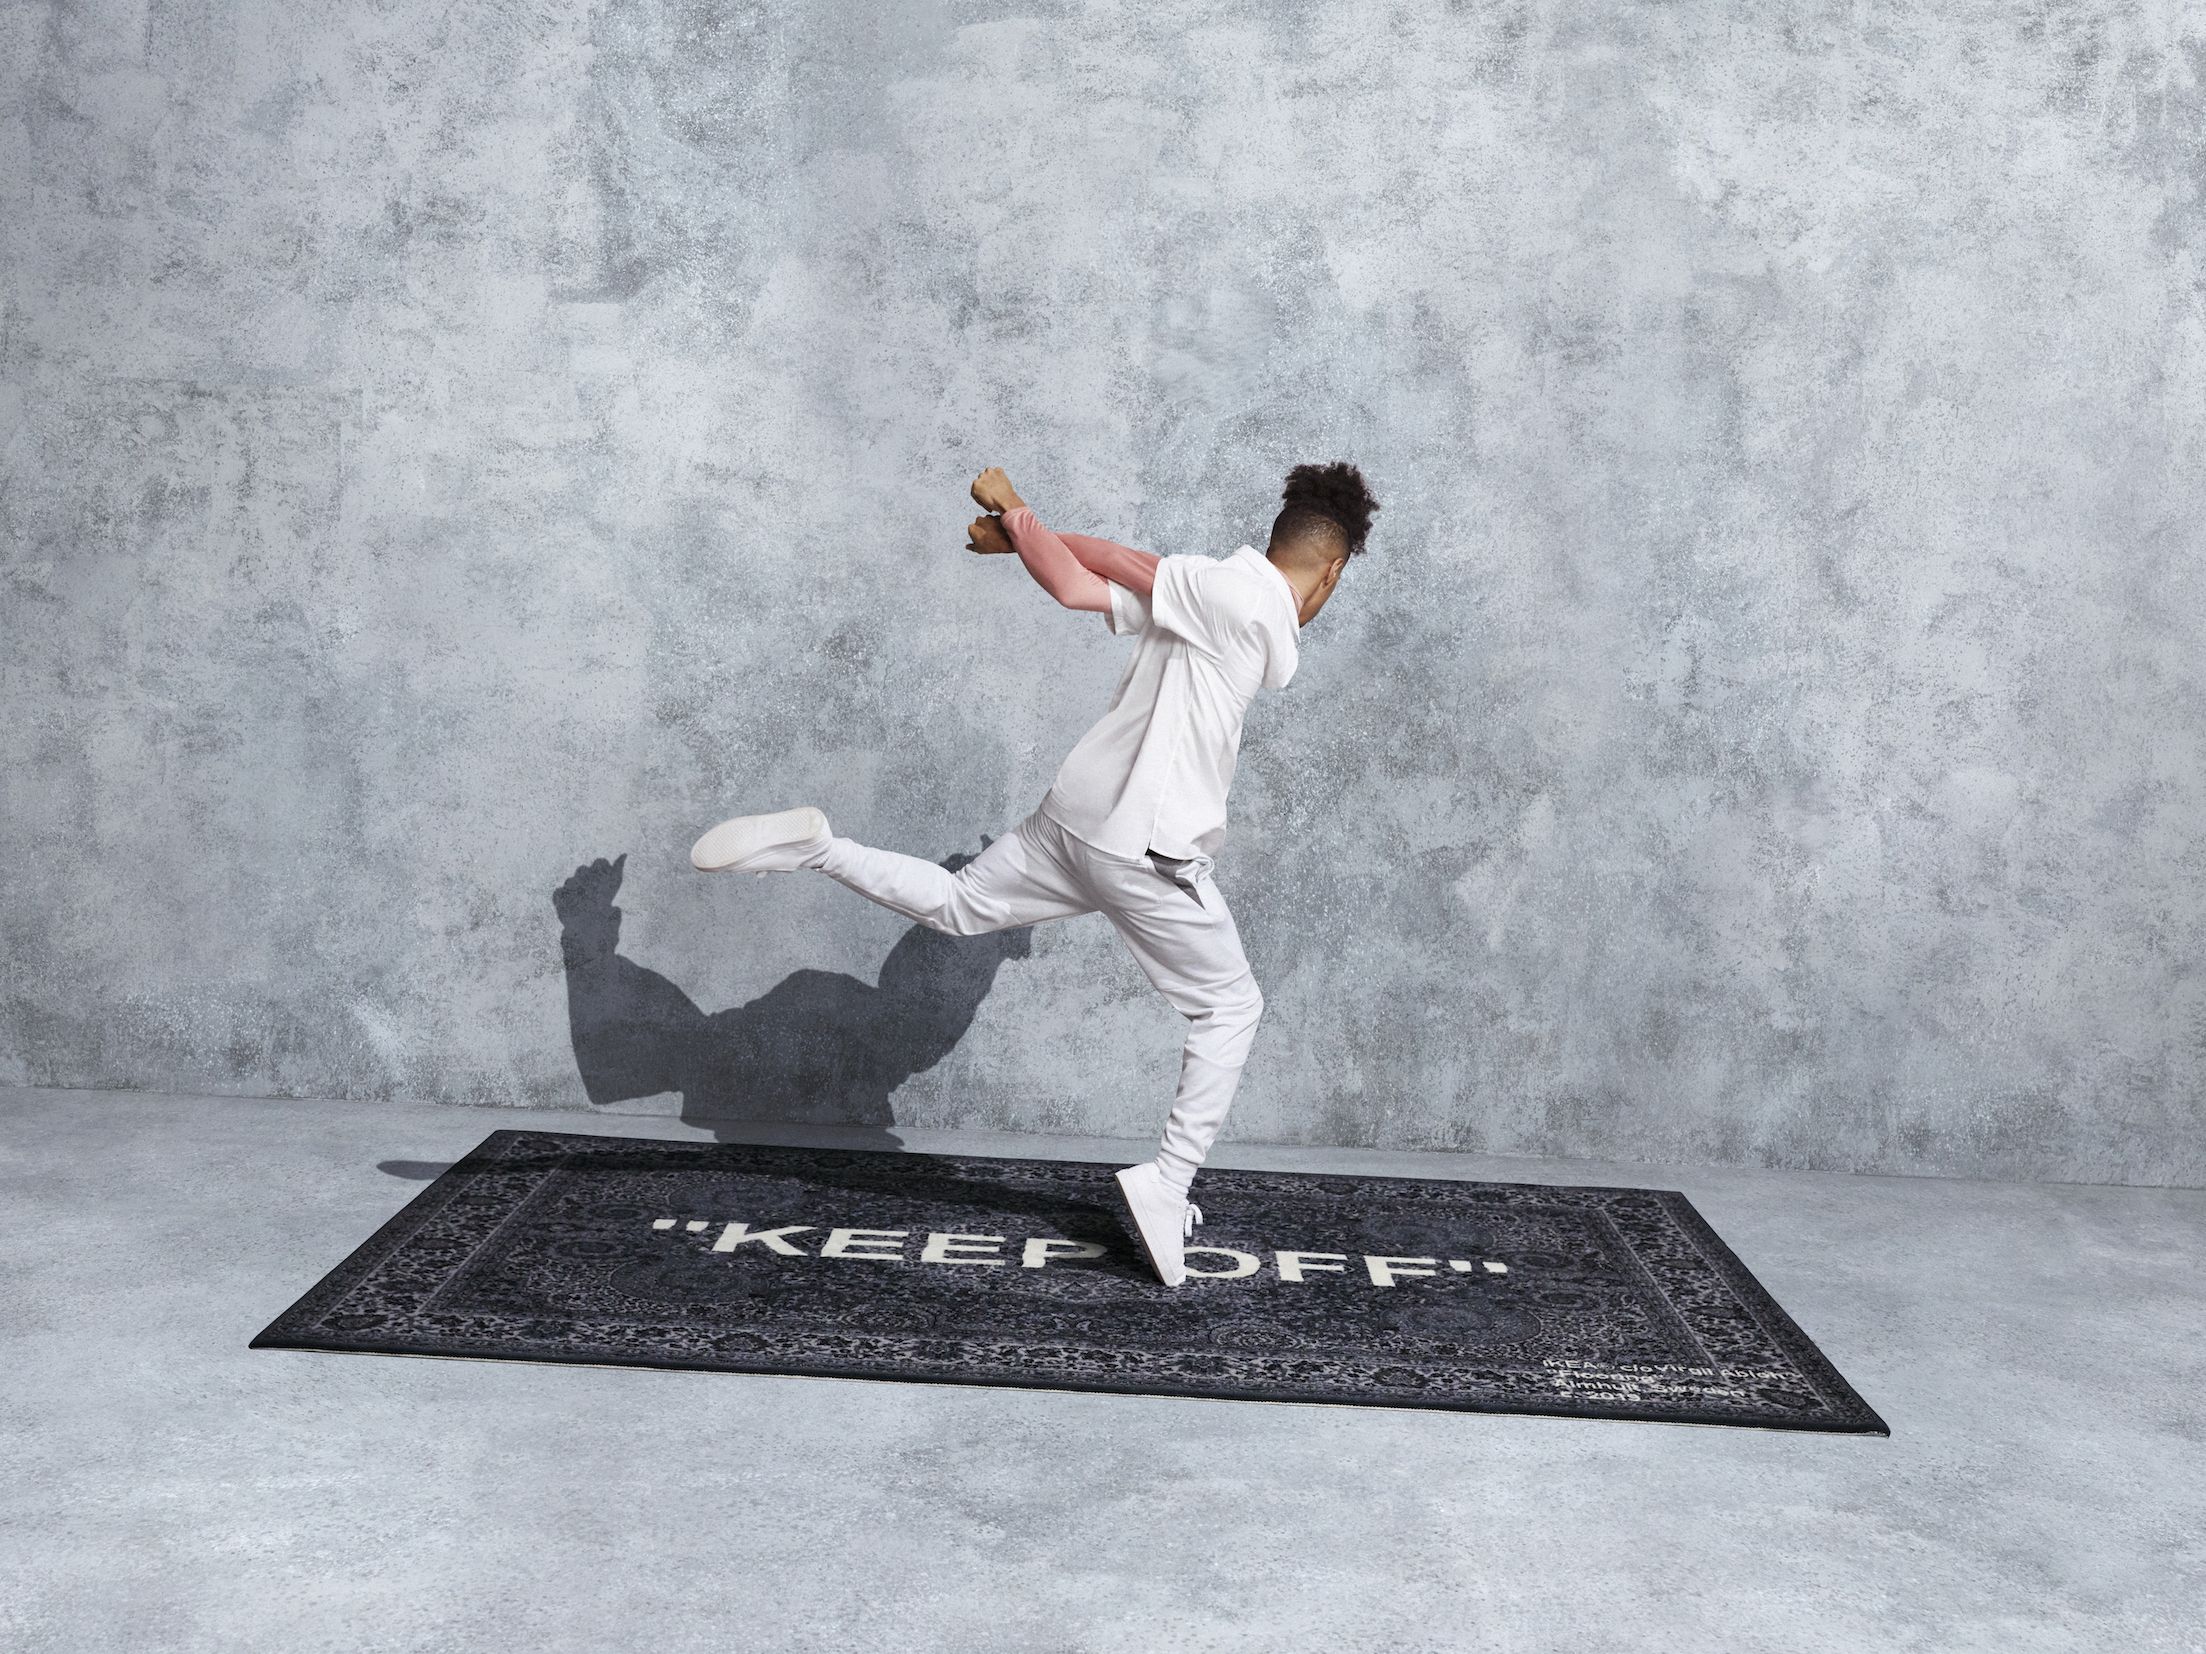 https://hips.hearstapps.com/hmg-prod/images/ikea-is-now-selling-virgil-abloh-s-limited-edition-keep-off-rug-for-400-online-2-1559285680.jpg